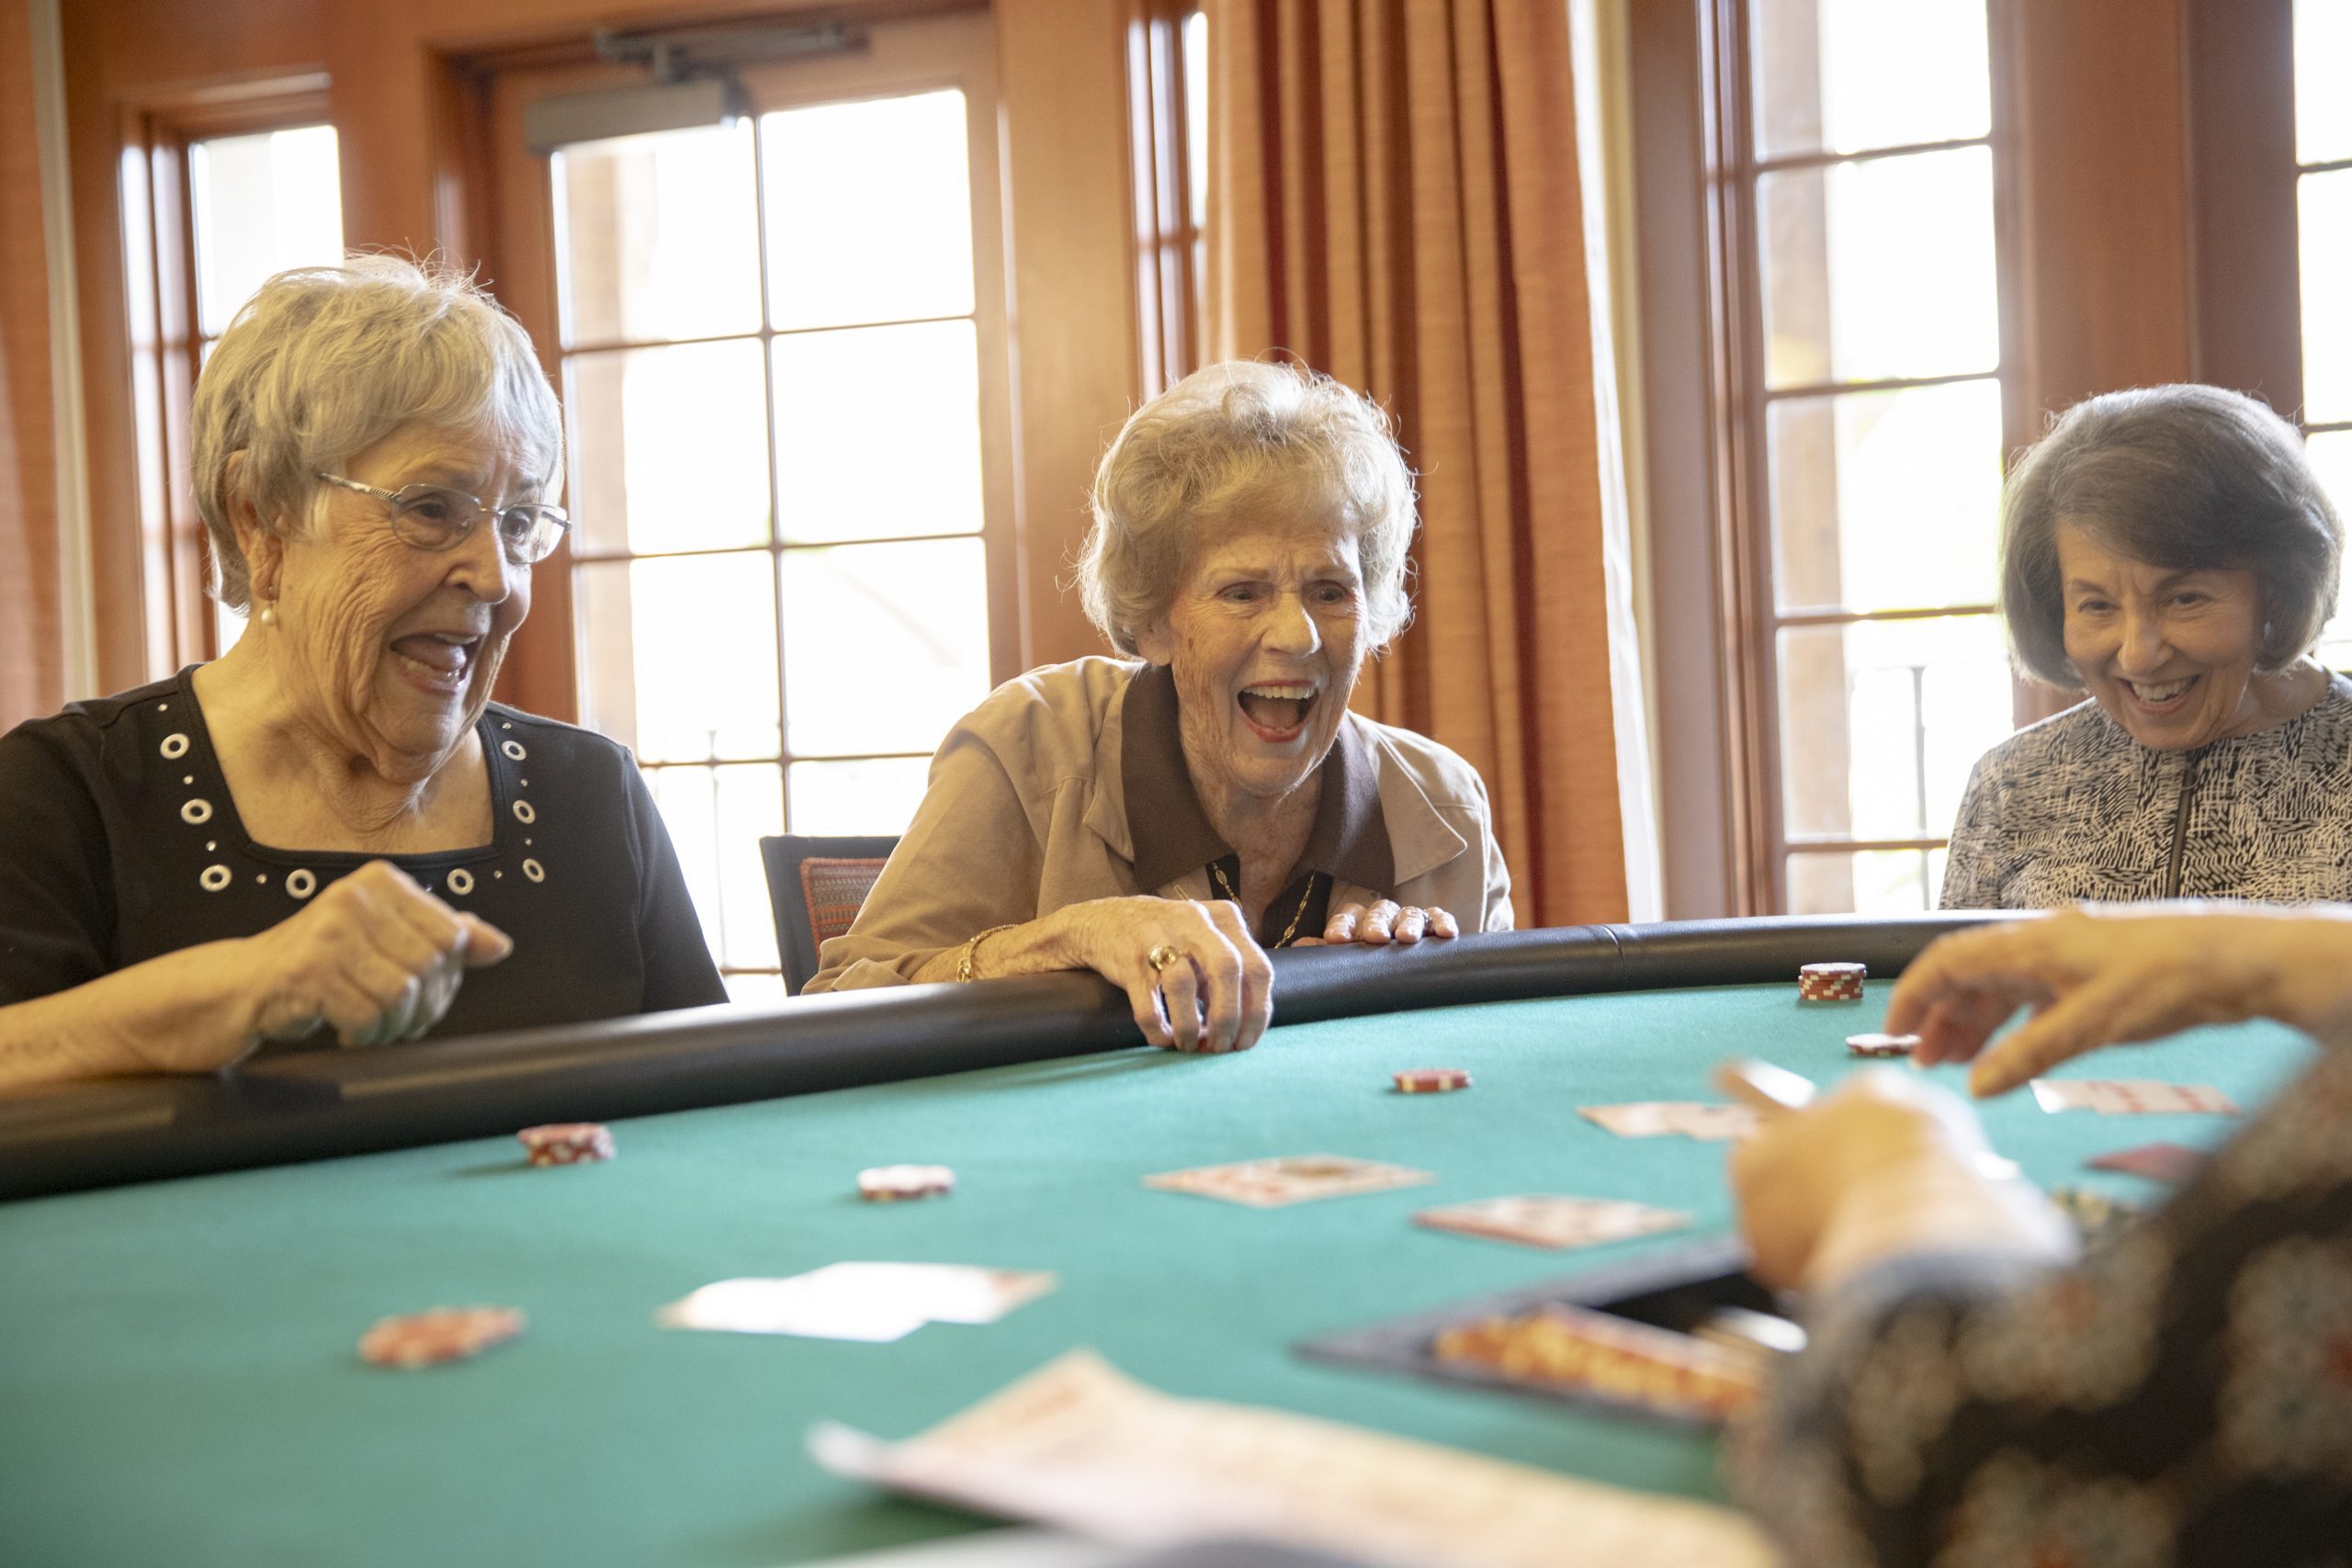 Senior citizens enjoying a variety of casino games, including poker, slot machines, and roulette.